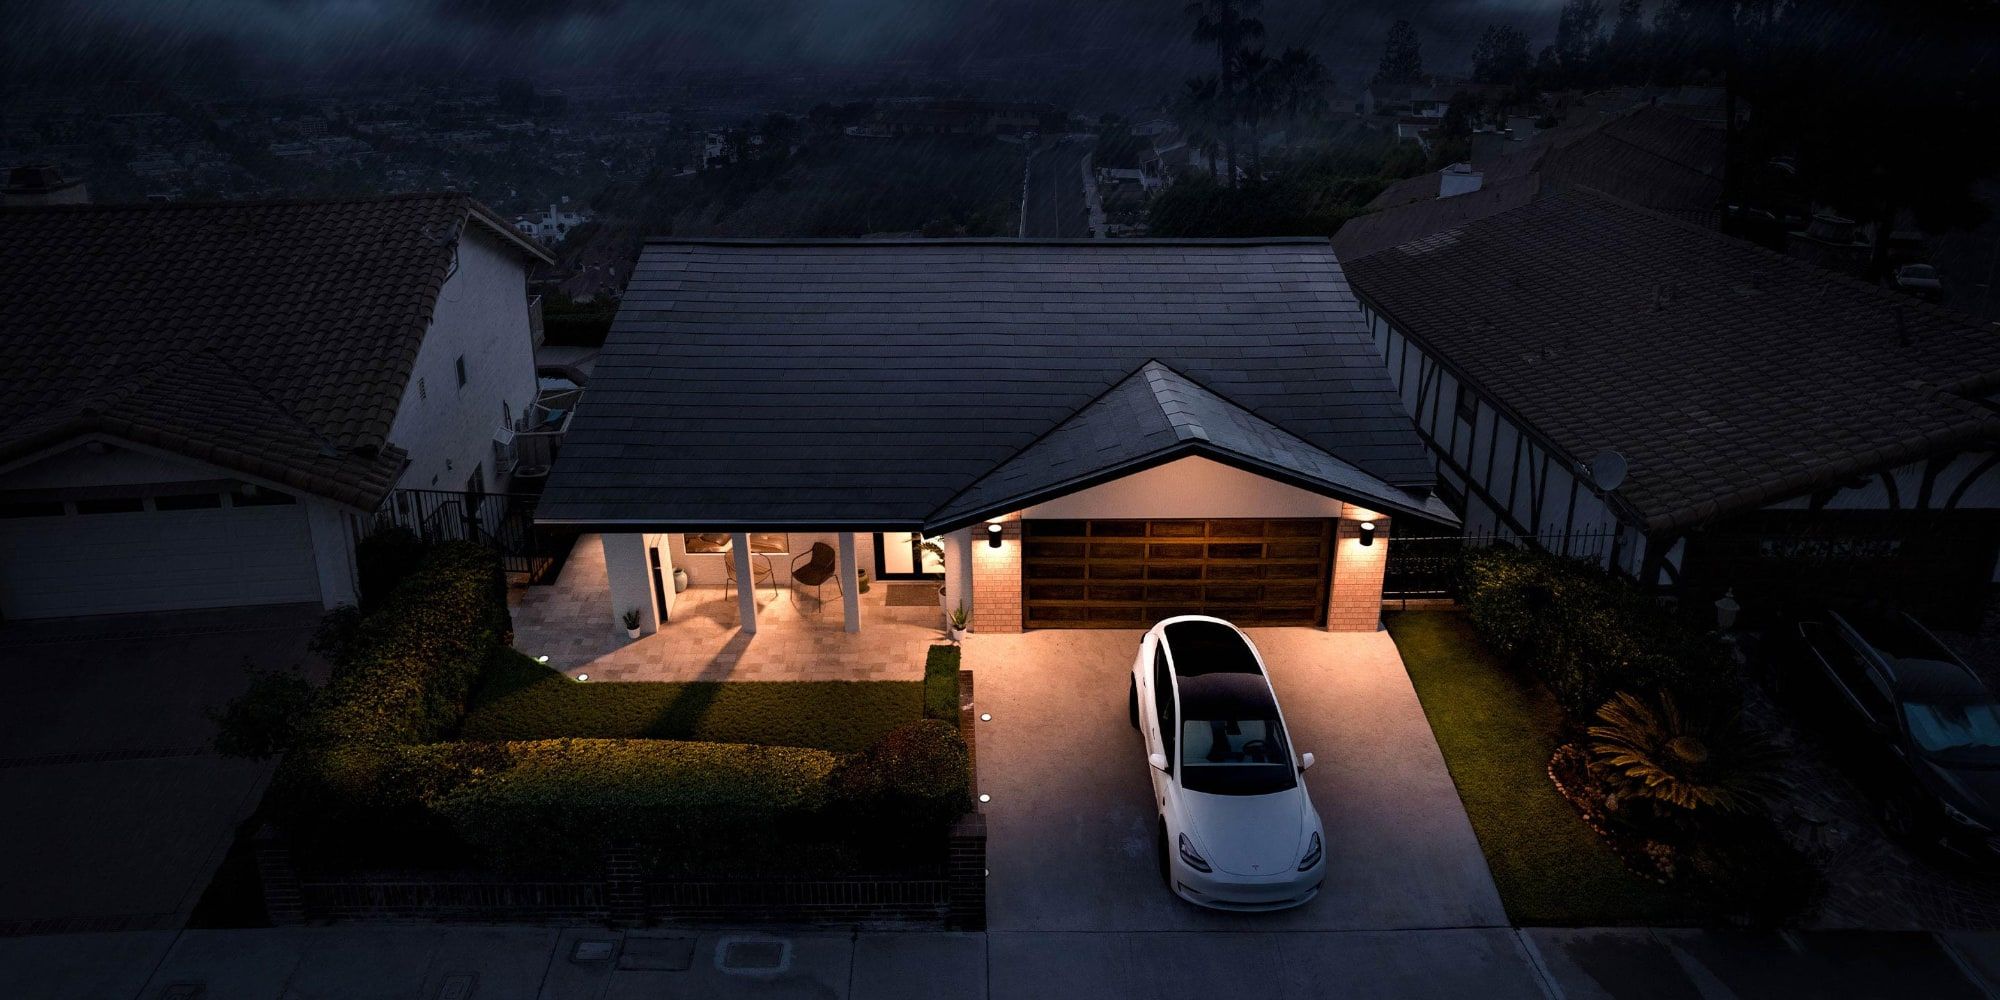 Tesla Solar Roof Electricity During Power Outage Brownout